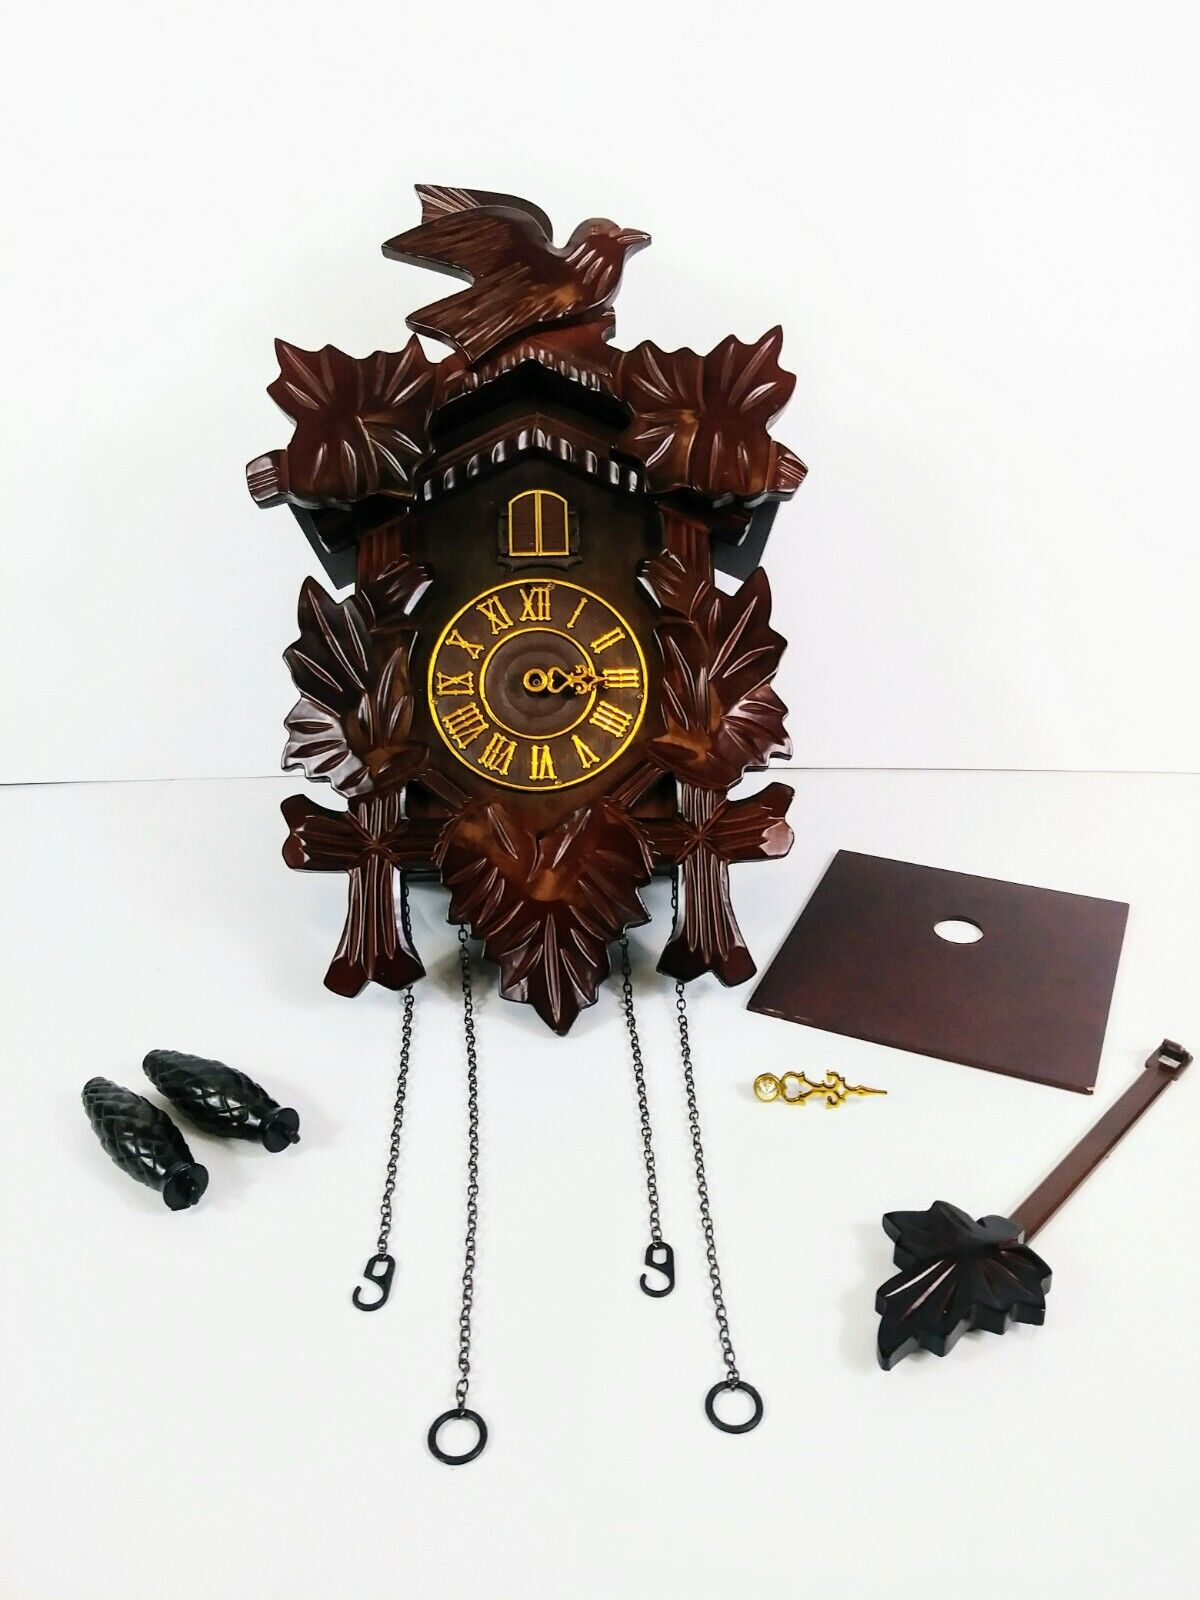 Wood Coo Coo Clock Bird / Leaves Repair or Parts 15" Tall X 9 3/4" Wide Unknown